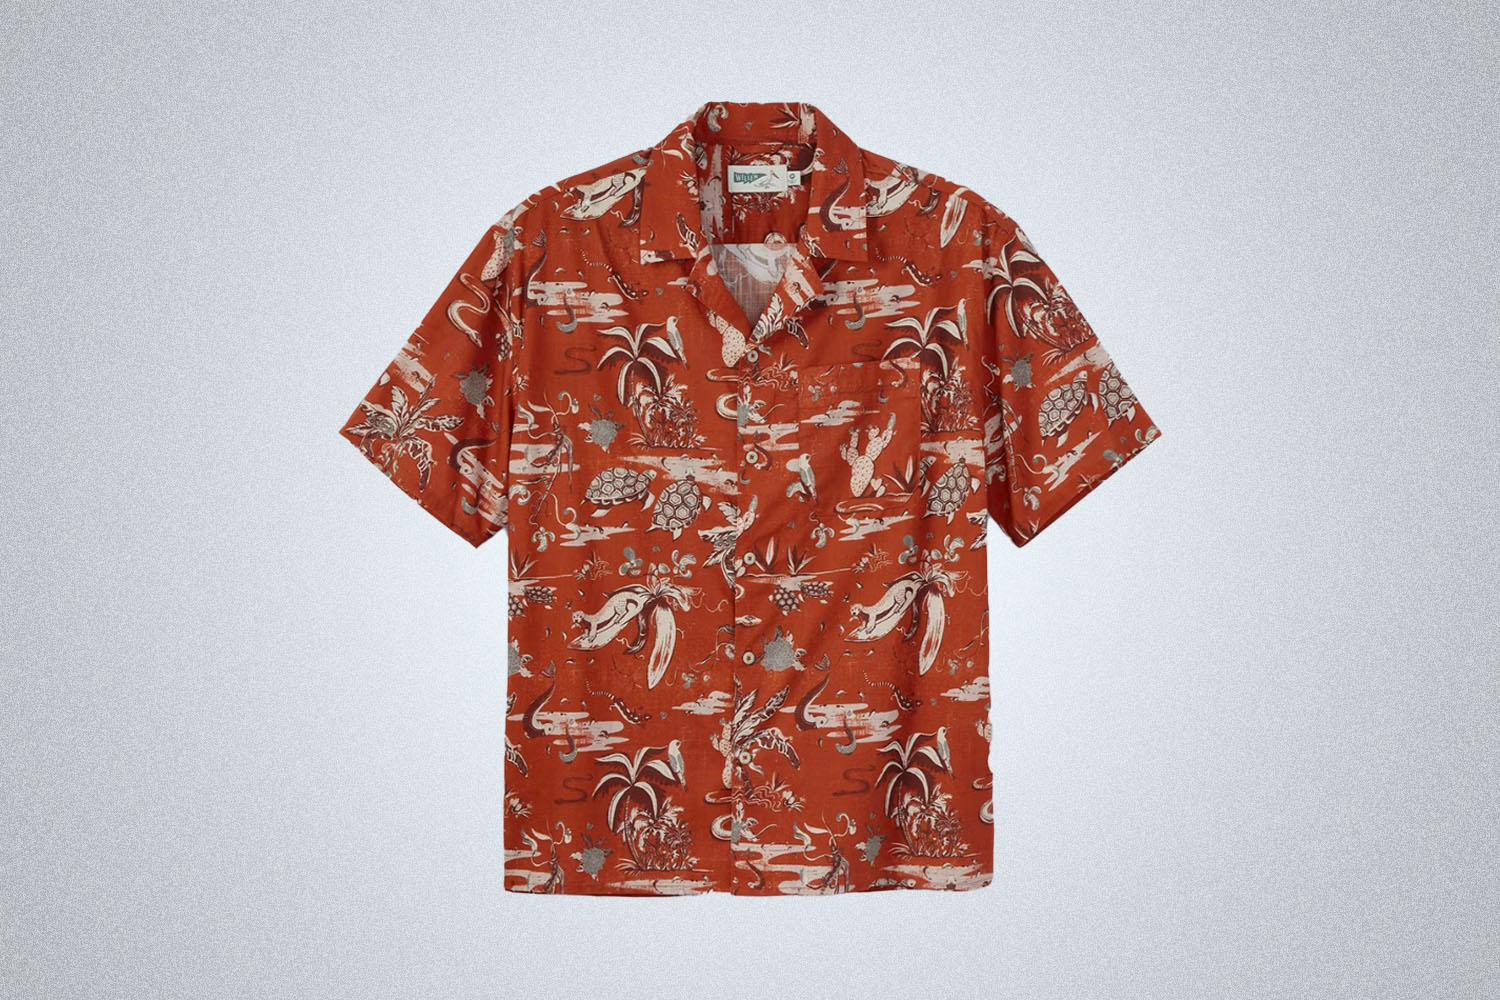 a red printed shirt from Wellen on a grey background